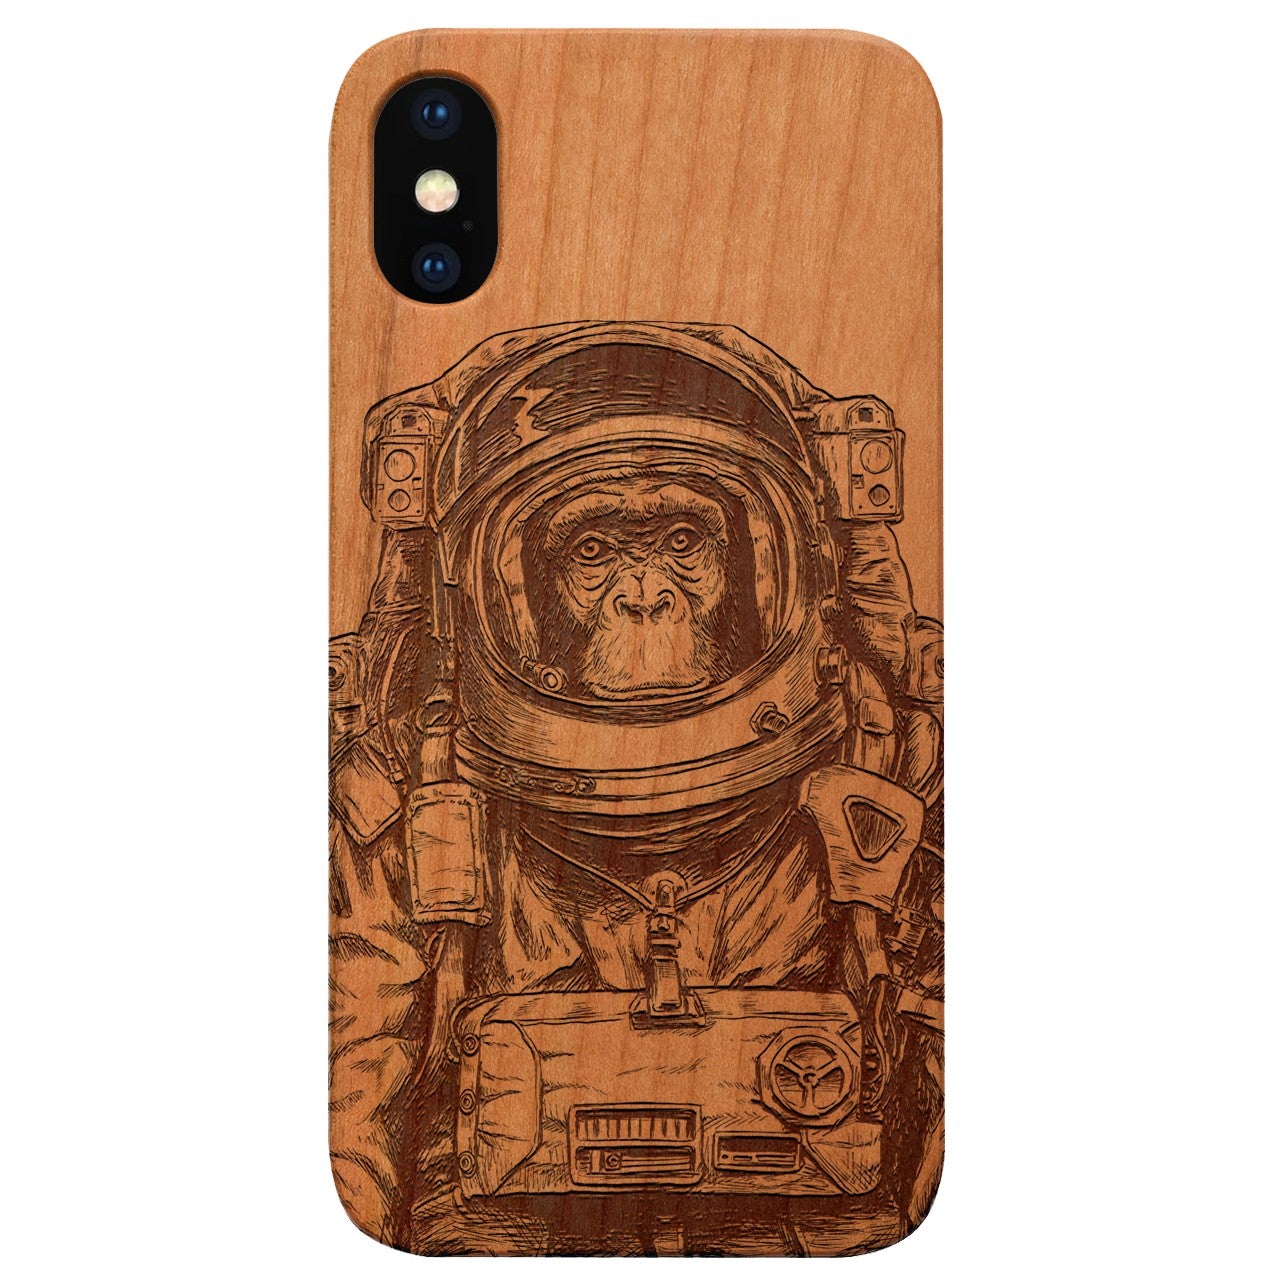  Astronaut Monkey - Engraved - Wooden Phone Case - IPhone 13 Models